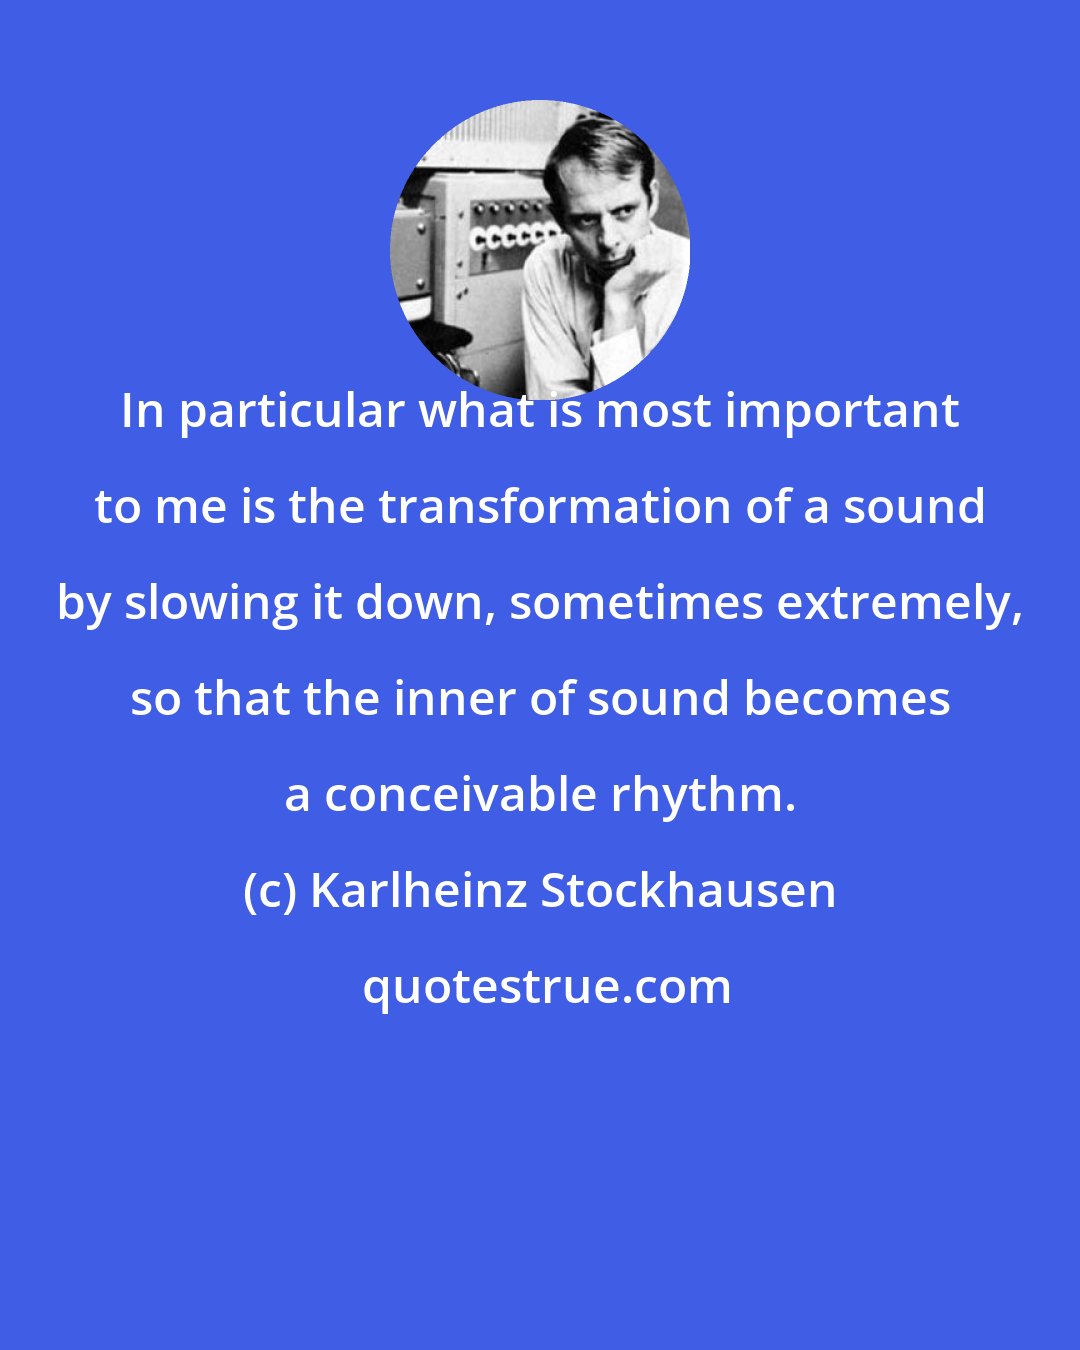 Karlheinz Stockhausen: In particular what is most important to me is the transformation of a sound by slowing it down, sometimes extremely, so that the inner of sound becomes a conceivable rhythm.